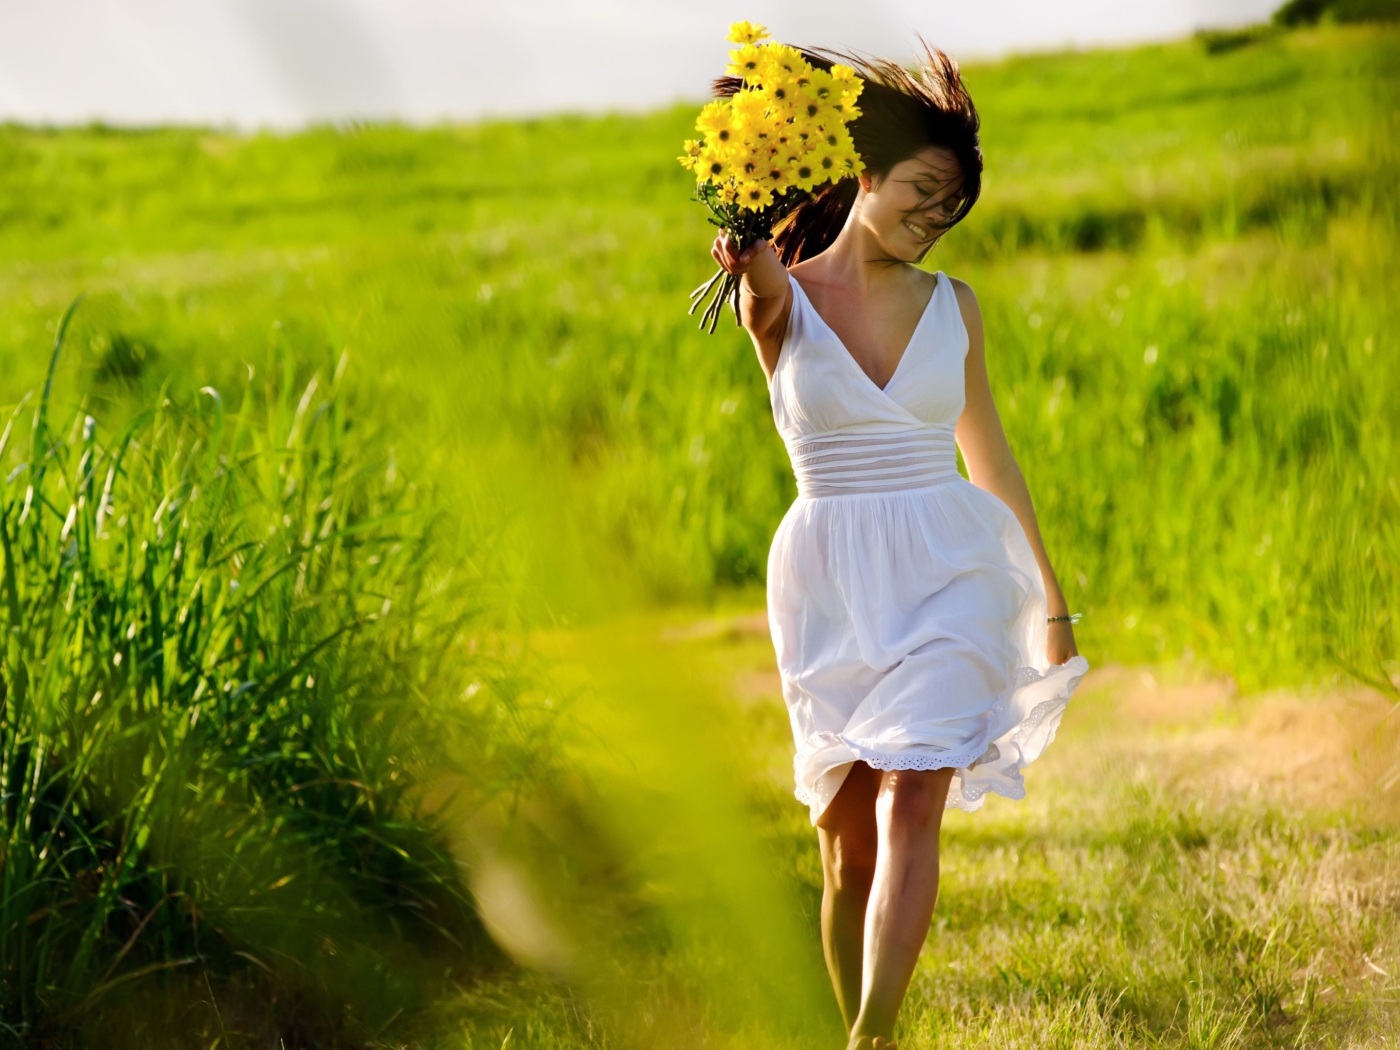 Girl With Yellow Flowers In Field wallpaper 1400x1050